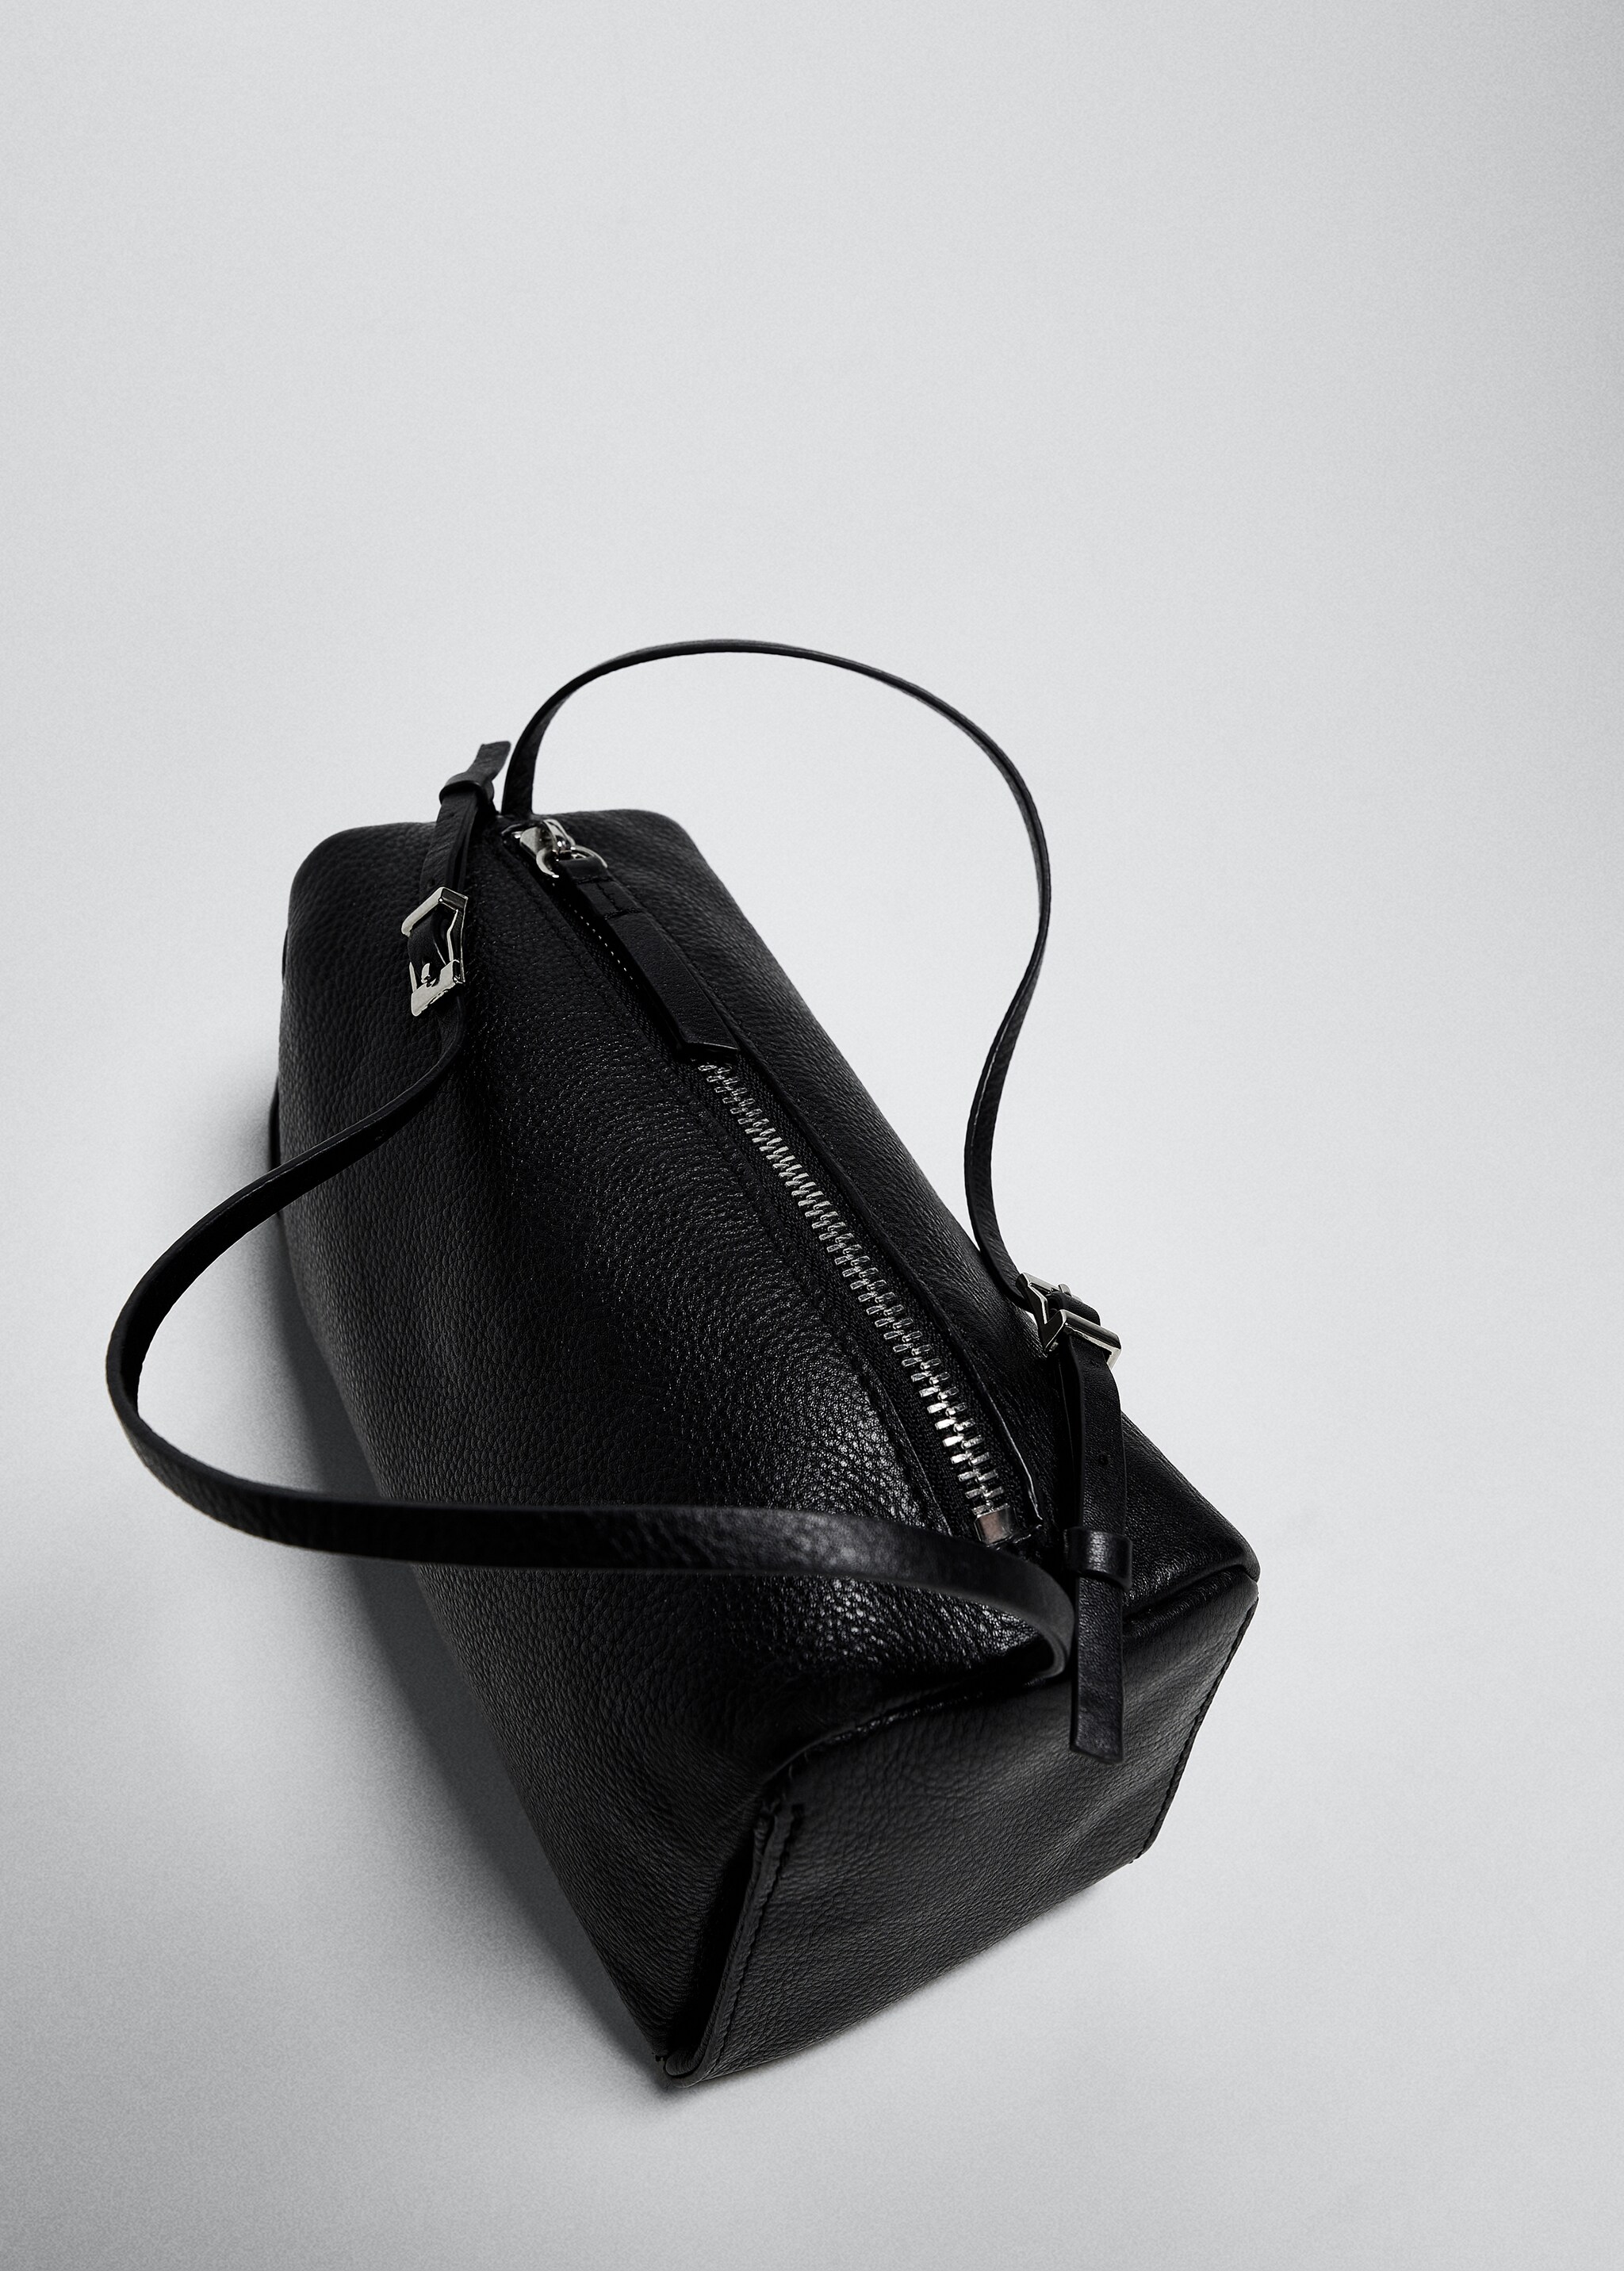 Small leather bag - Details of the article 5